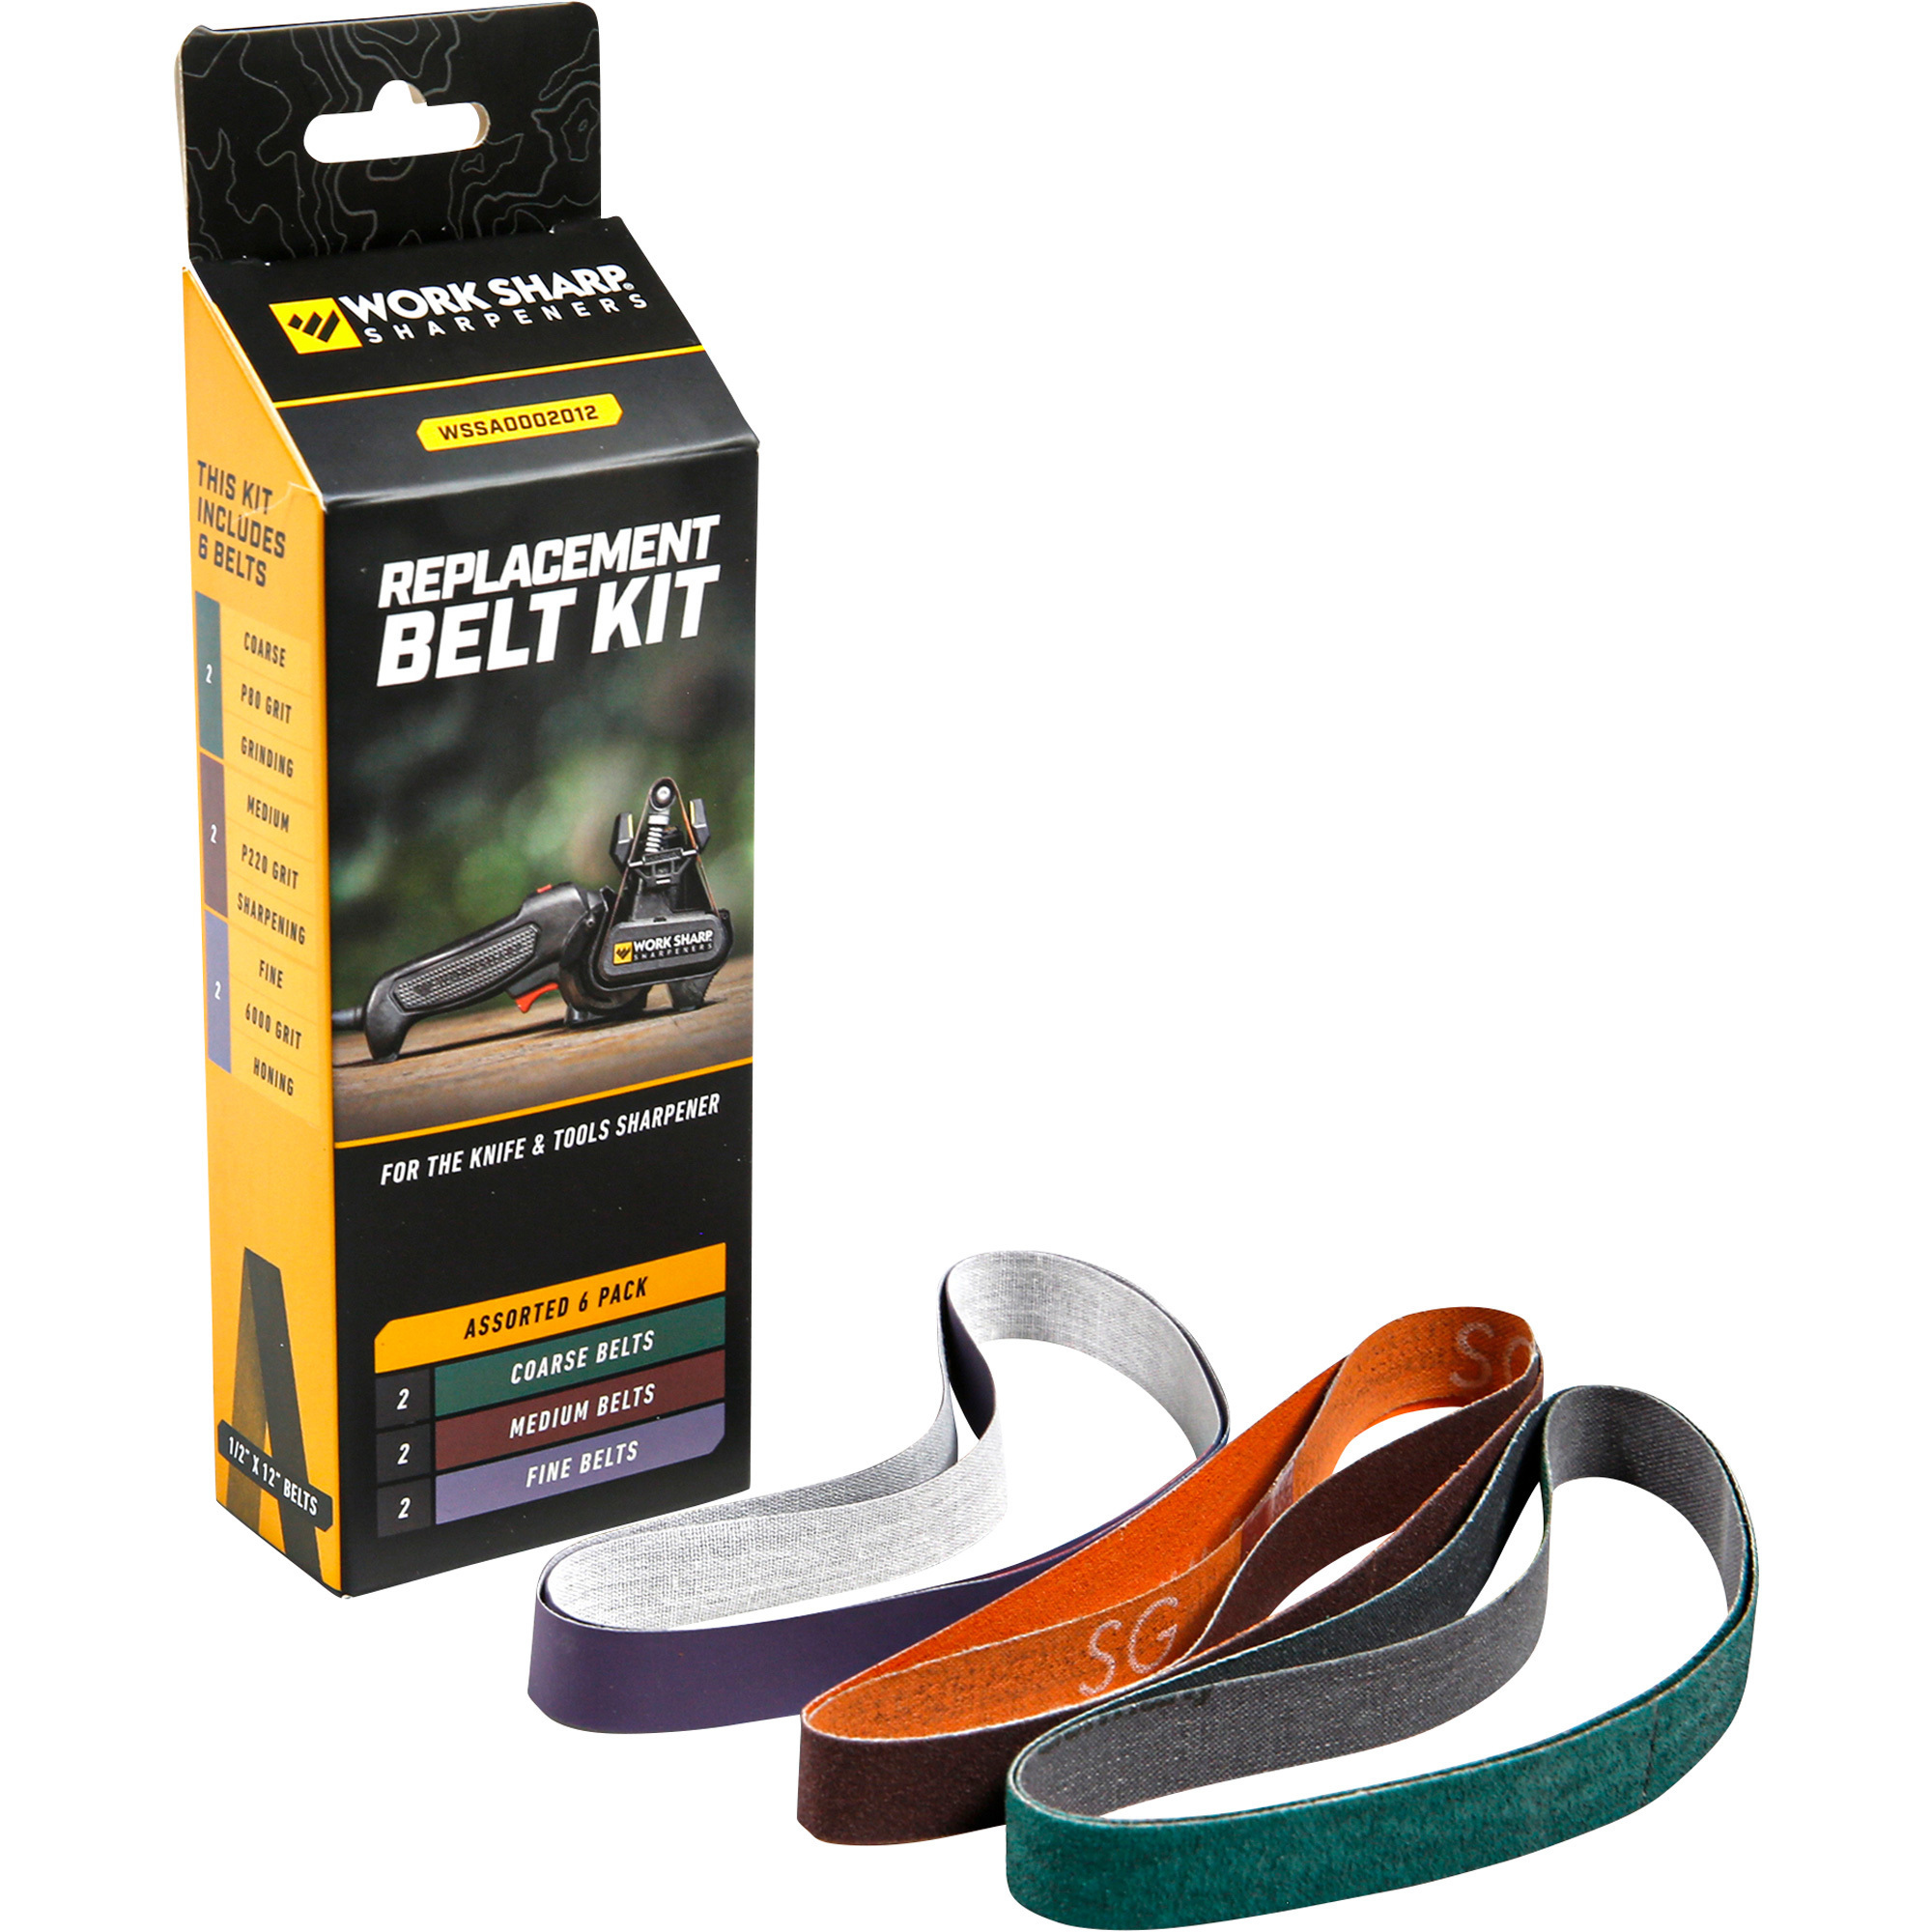 Ken Onion Knife And Tool Replacement Belts Assorted 5 Pack By Worksharp